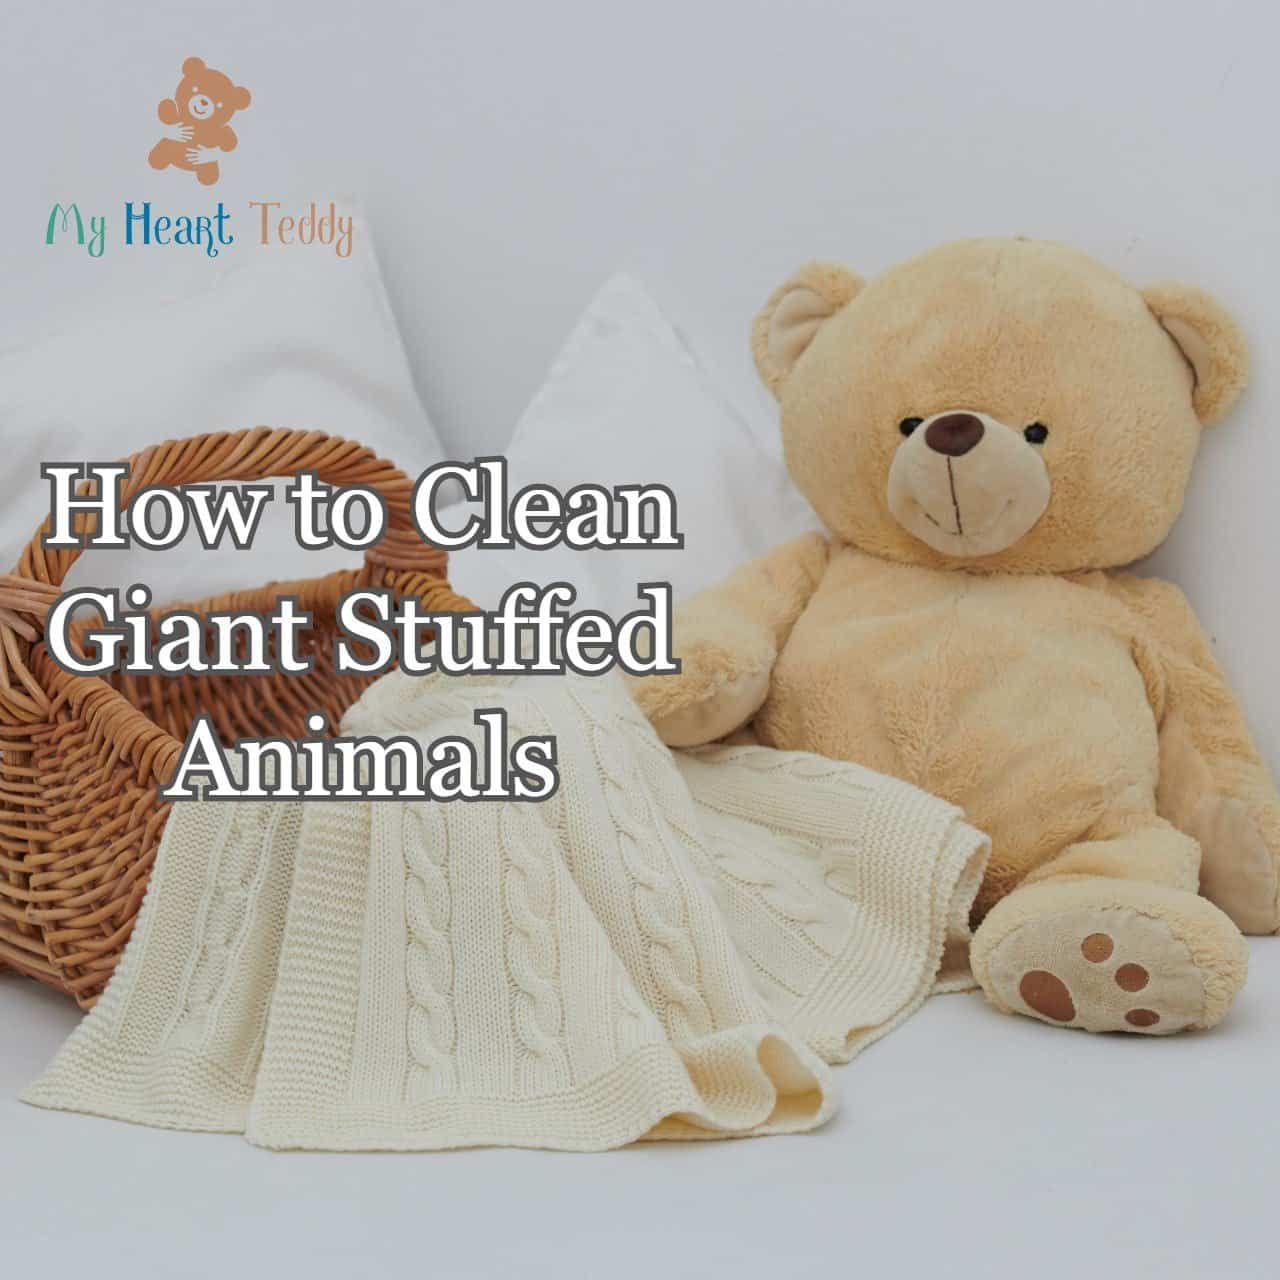 How To Sanitize Stuffed Animals That Can't Be Washed (2023)